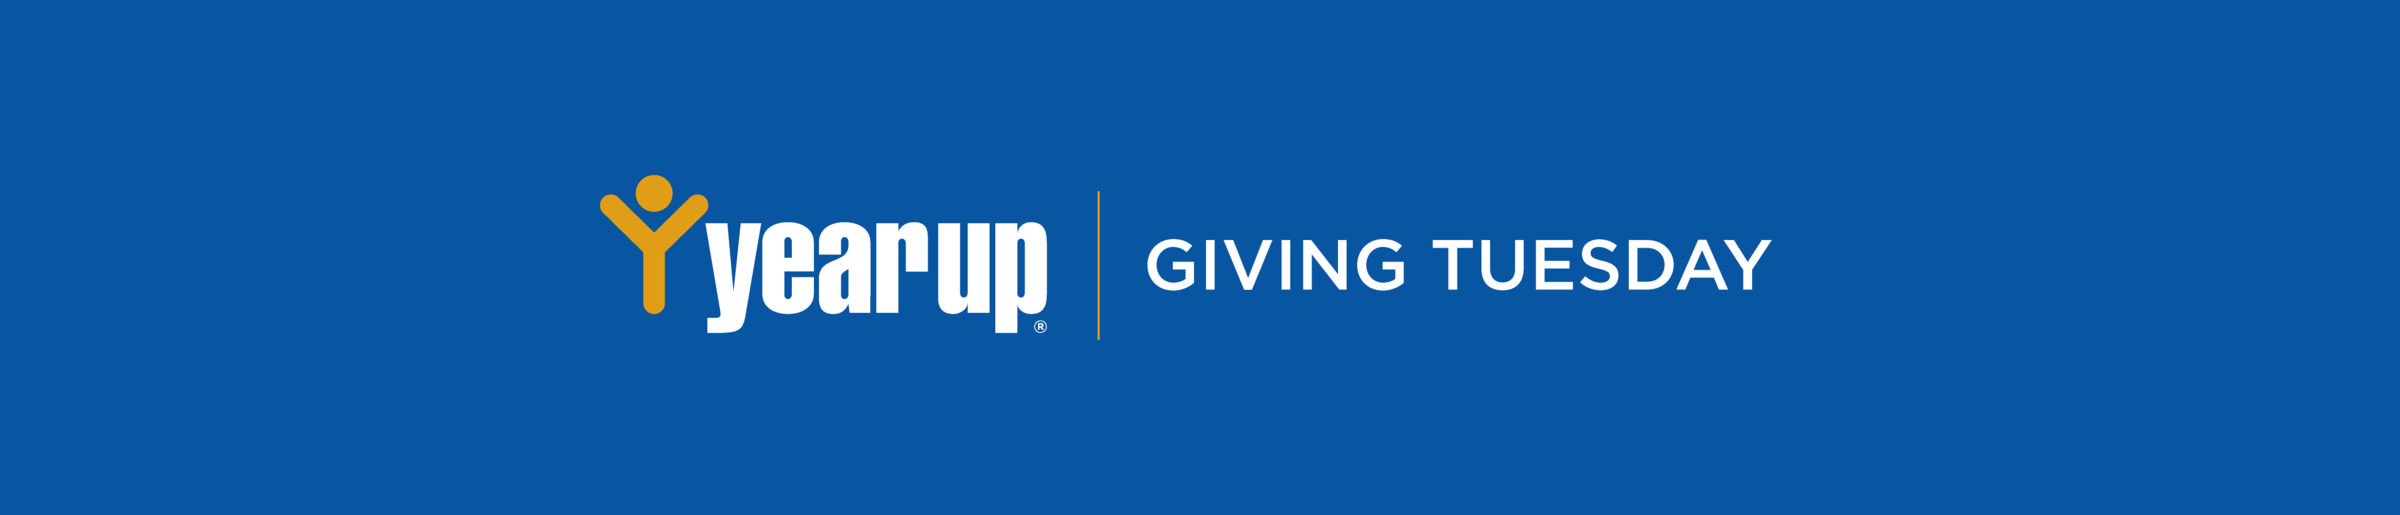 Year Up 2021 Giving Tuesday Call